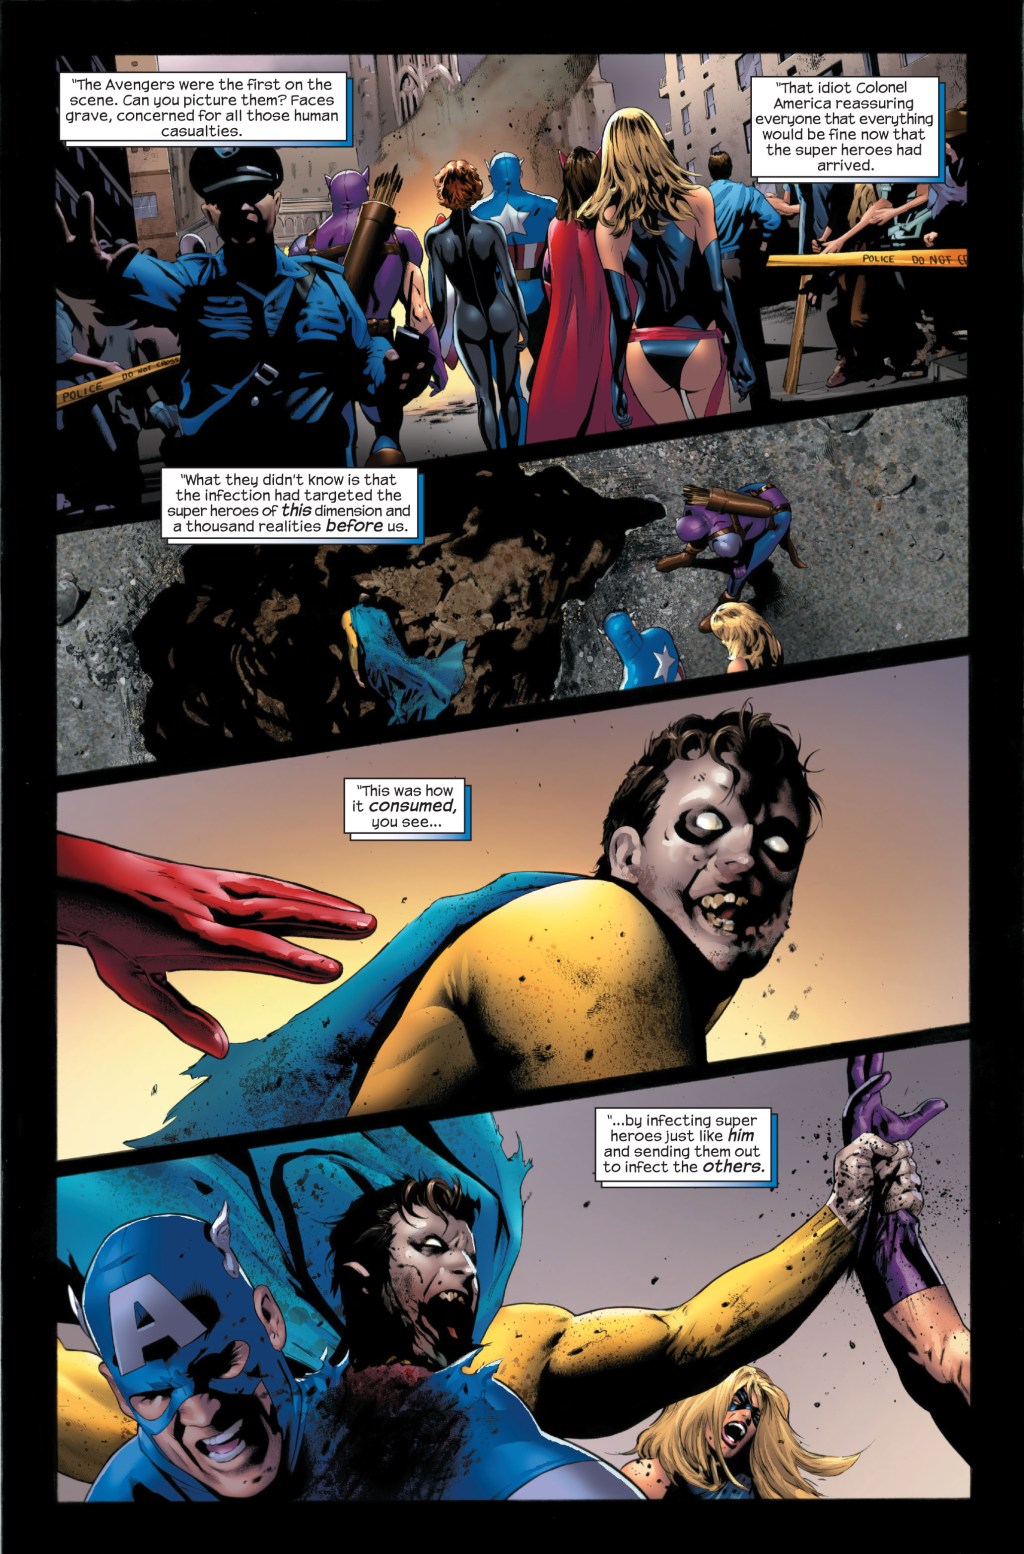 The Reed Richards of Earth-2149 recalls the origin of his universe's zombie infection to his Earth-1610 counterpart in Ultimate Fantastic Four Vol. 1 #22 "Crossover: Part 2" (2005), Marvel Comics. Words by Mark Millar, art by Greg Land, Matt Ryan, Justin Ponsor, and Chris Eliopoulos.